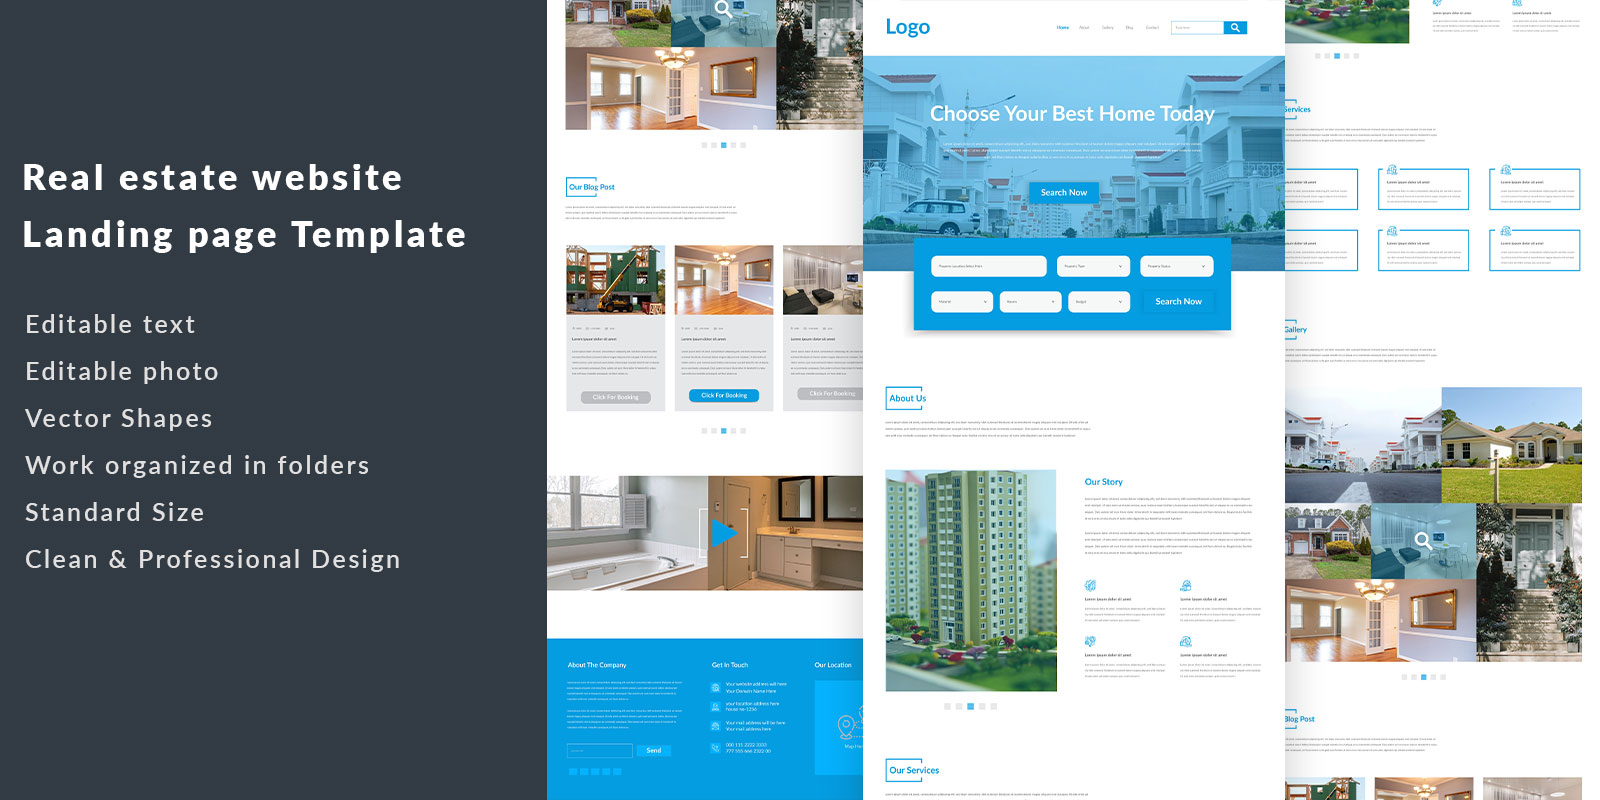 Real estate website Landing page Design - Corporate Identity Template